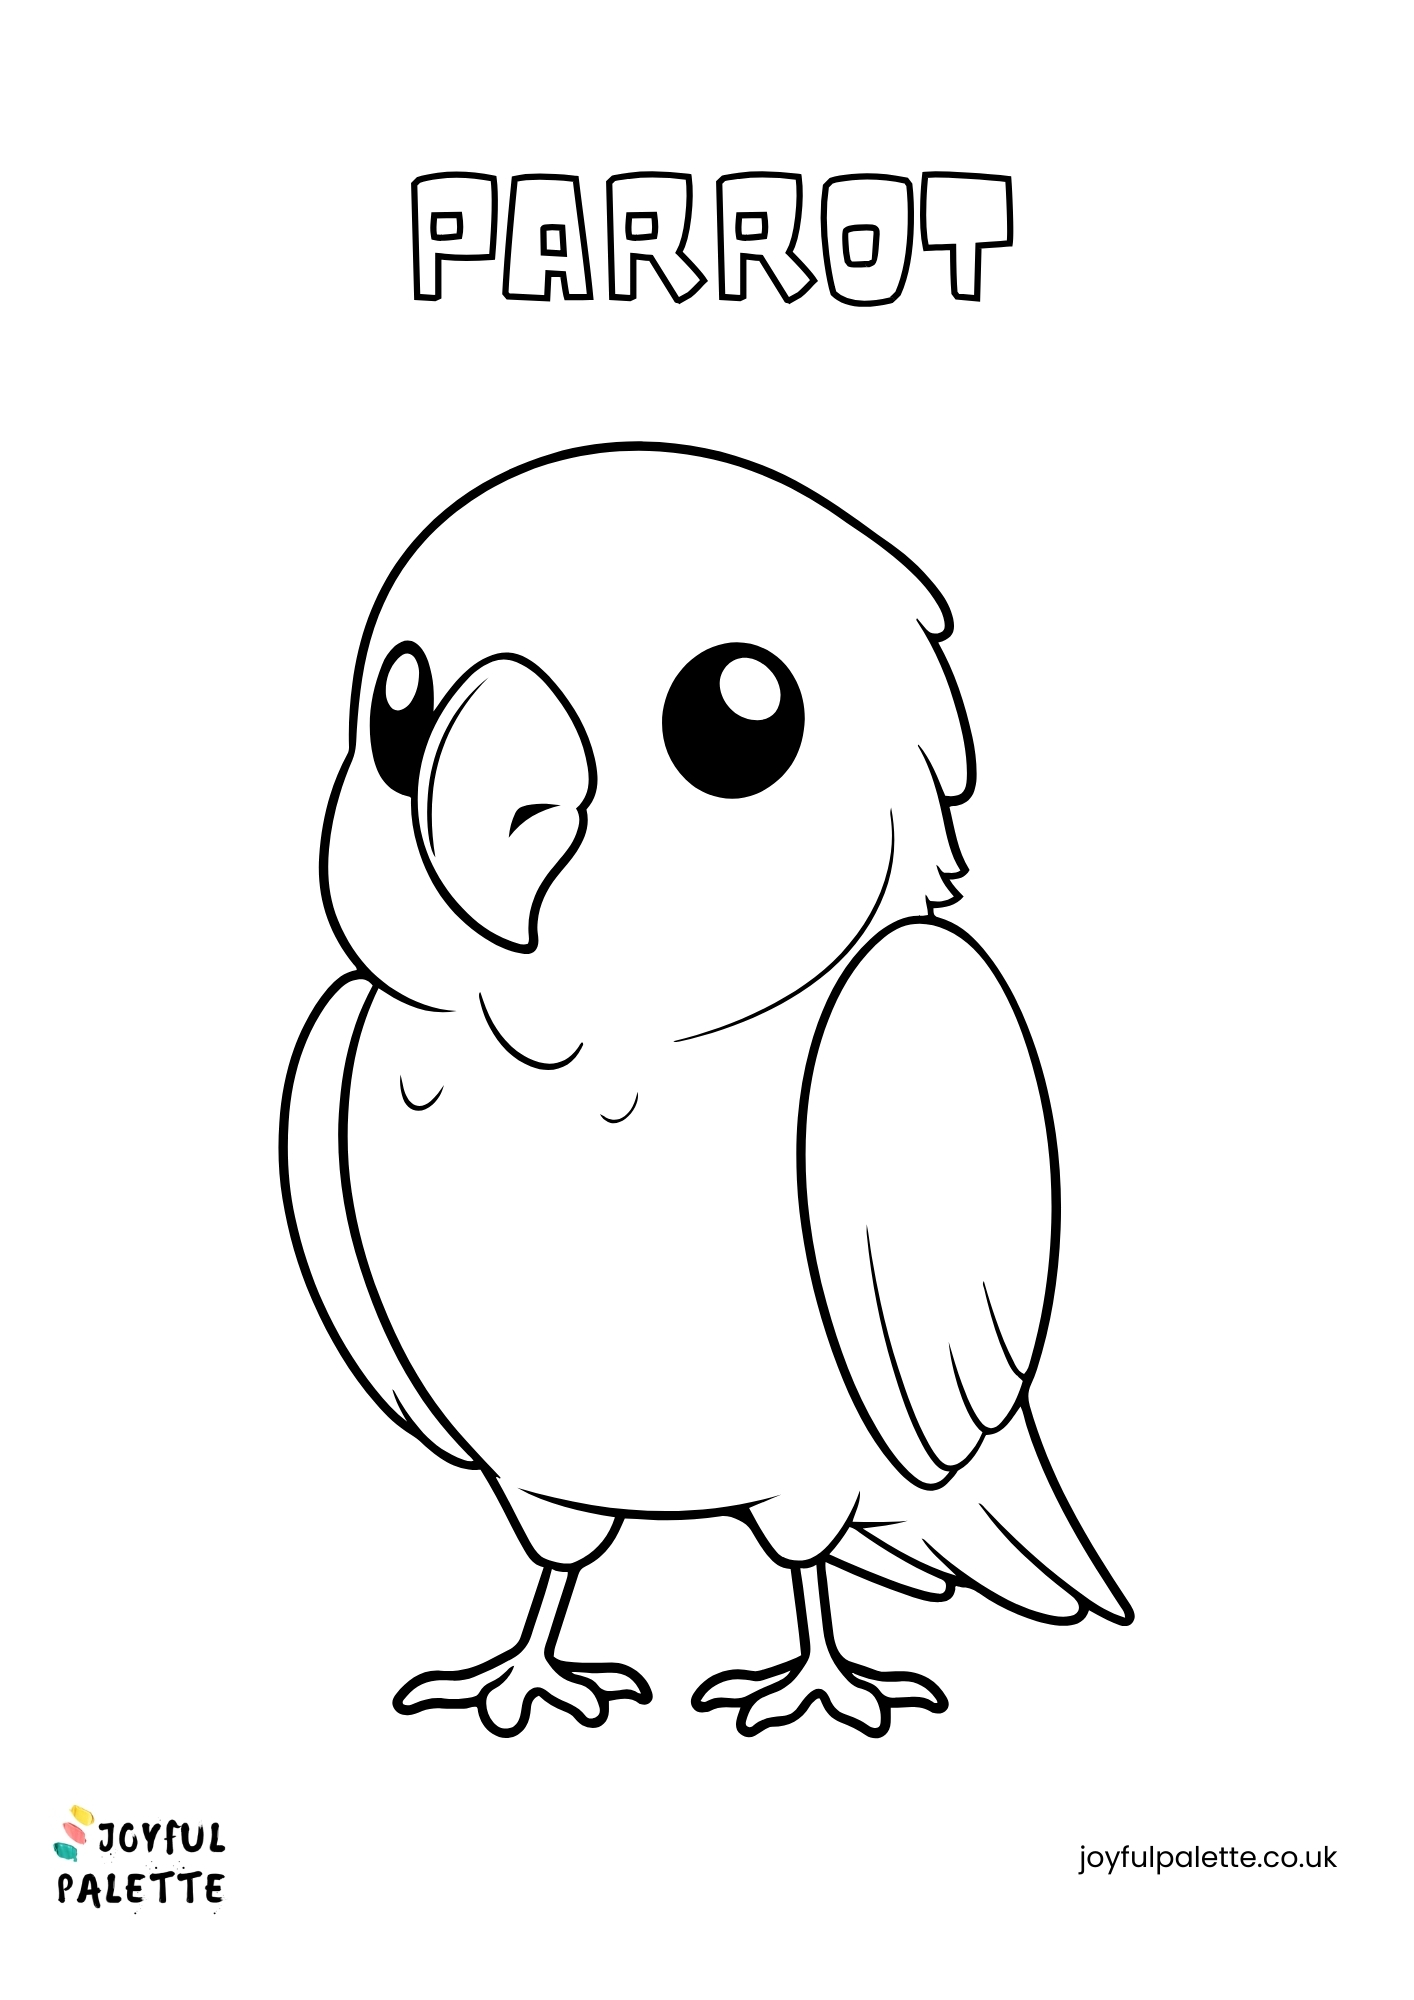 Parrot Coloring Page for Kids